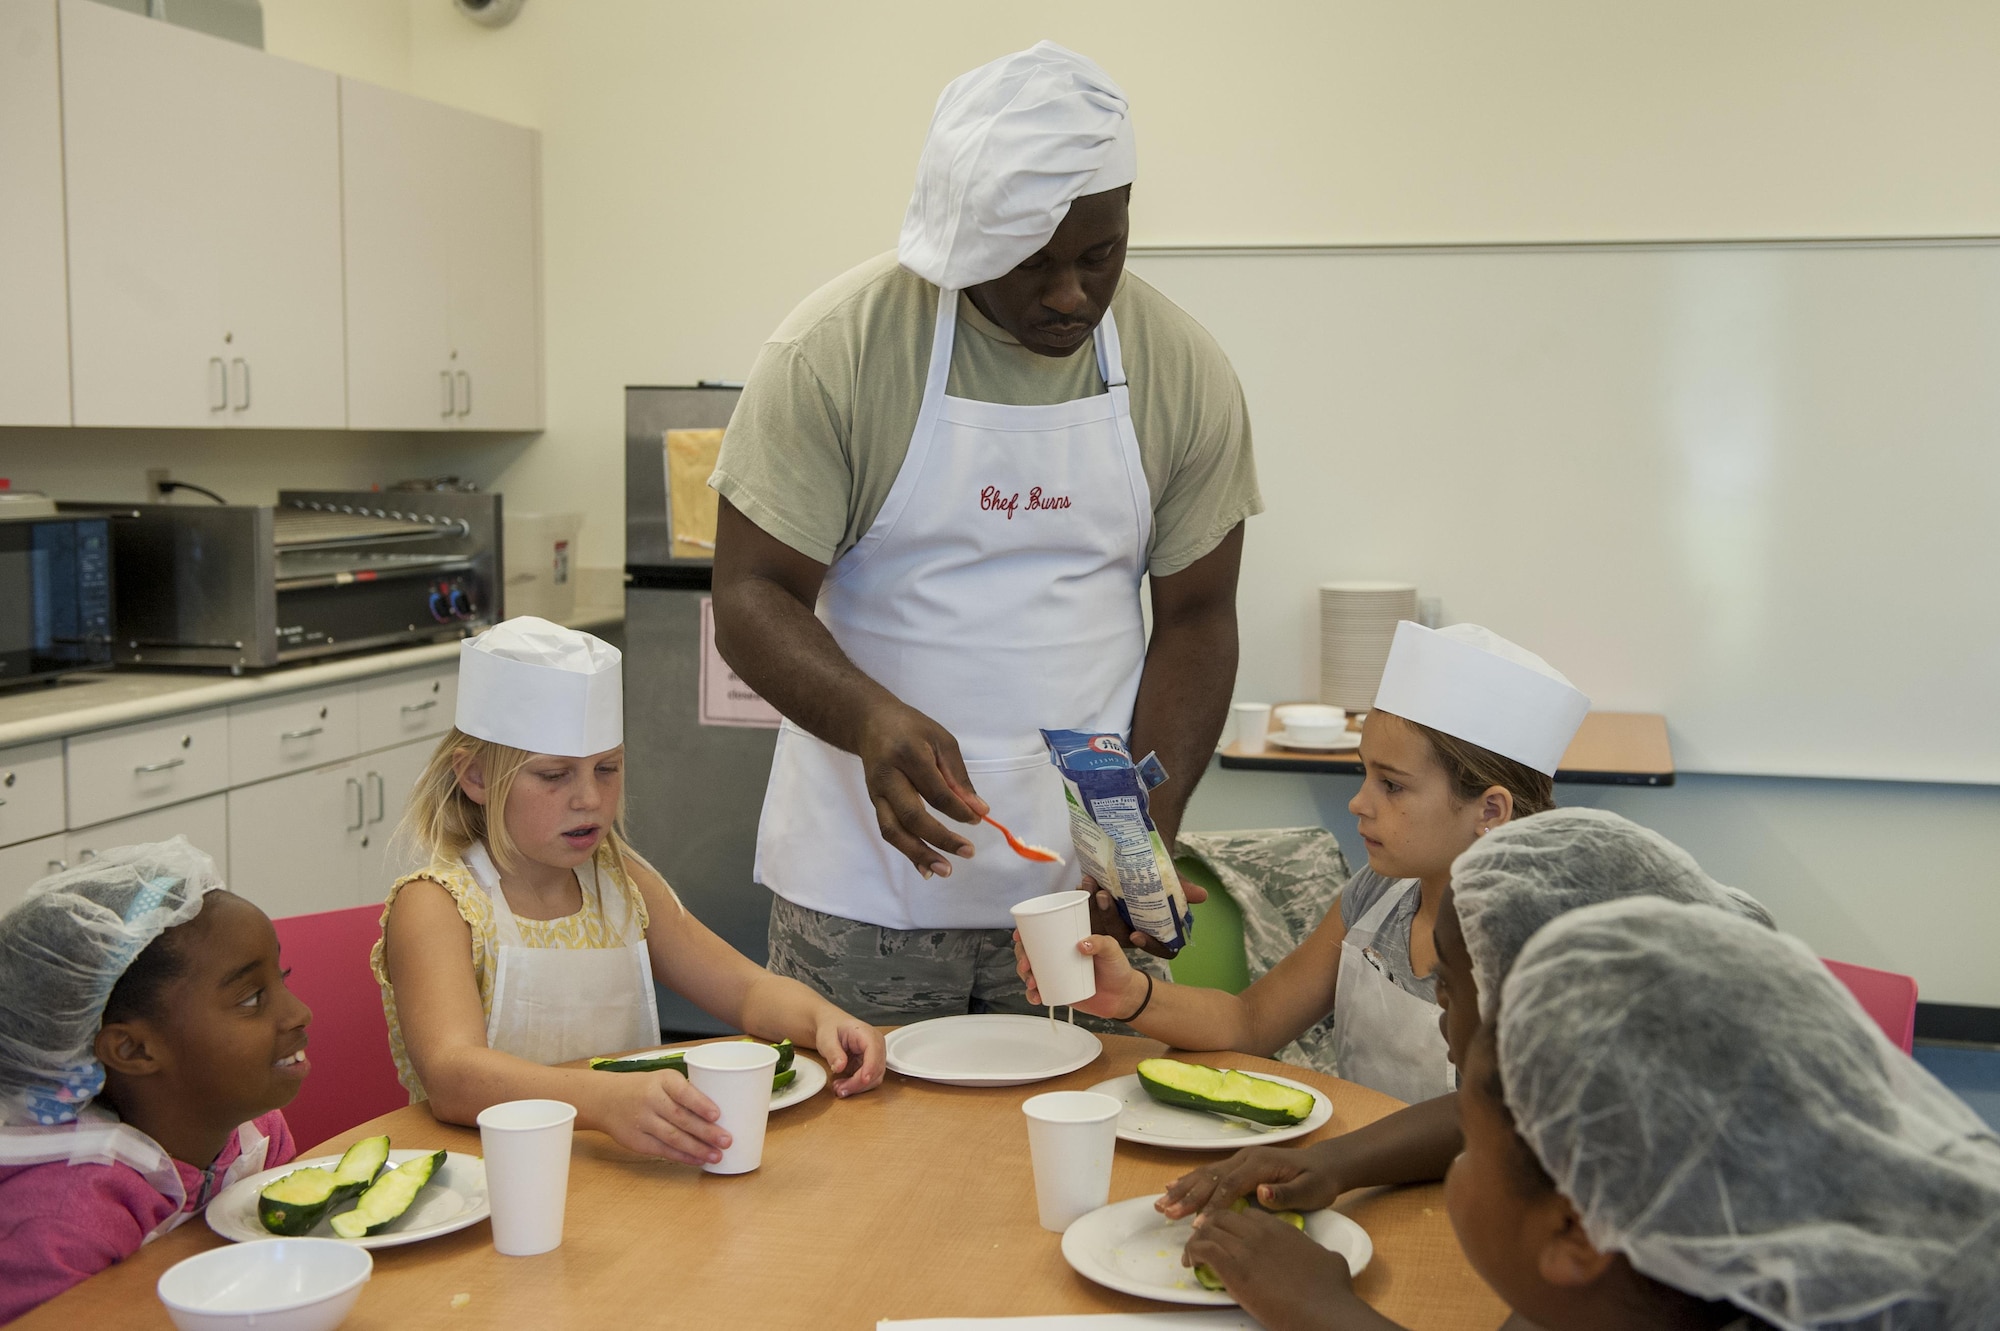 U.S. Air Force Tech. Sgt. Phillip Burns, 23d Civil Engineering firefighter, passes out ingredients to students during a youth cooking camp, July, 26, 2016, at Moody Air Force Base, Ga. On this day of the week-long camp, Burns taught students how to make Italian stuffed zucchini. (U.S. Air Force photo by Airman 1st Class Lauren M. Hunter)